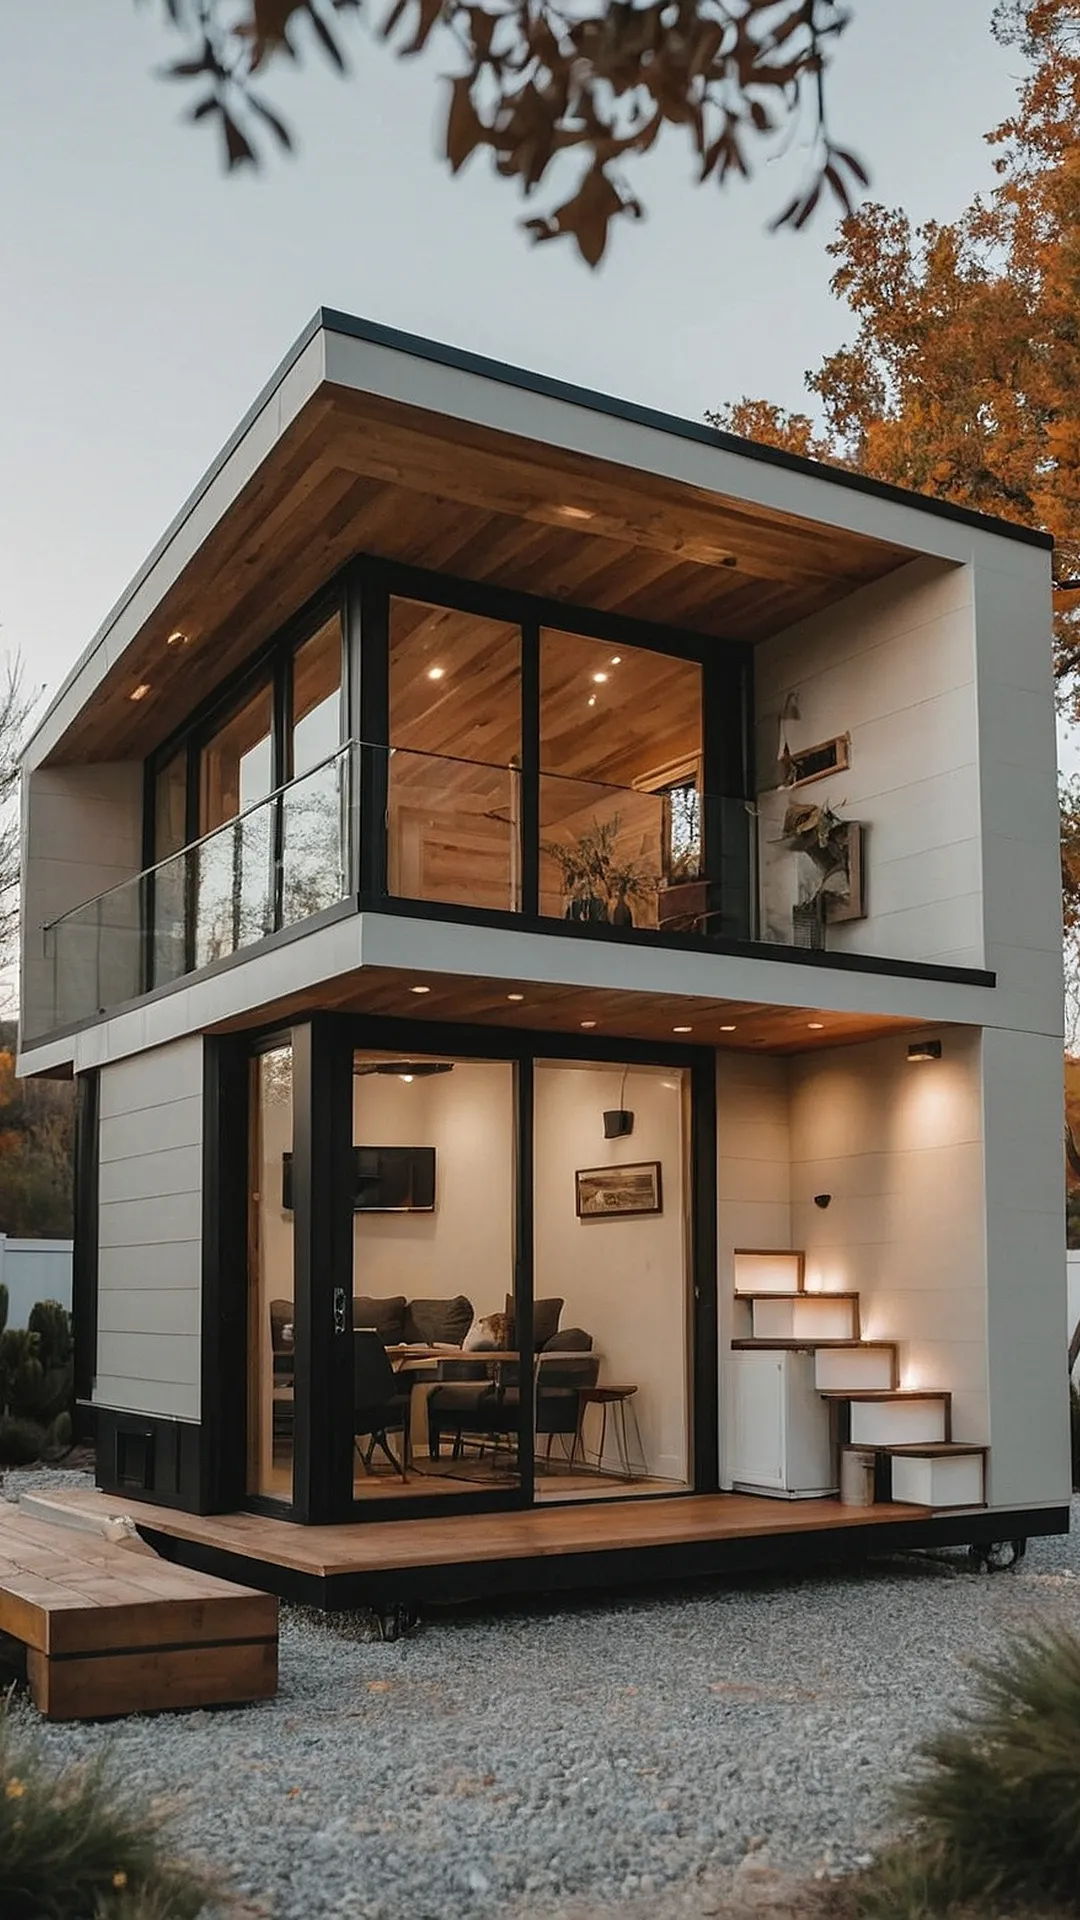 Sleek and Stylish: Contemporary Tiny Home Designs